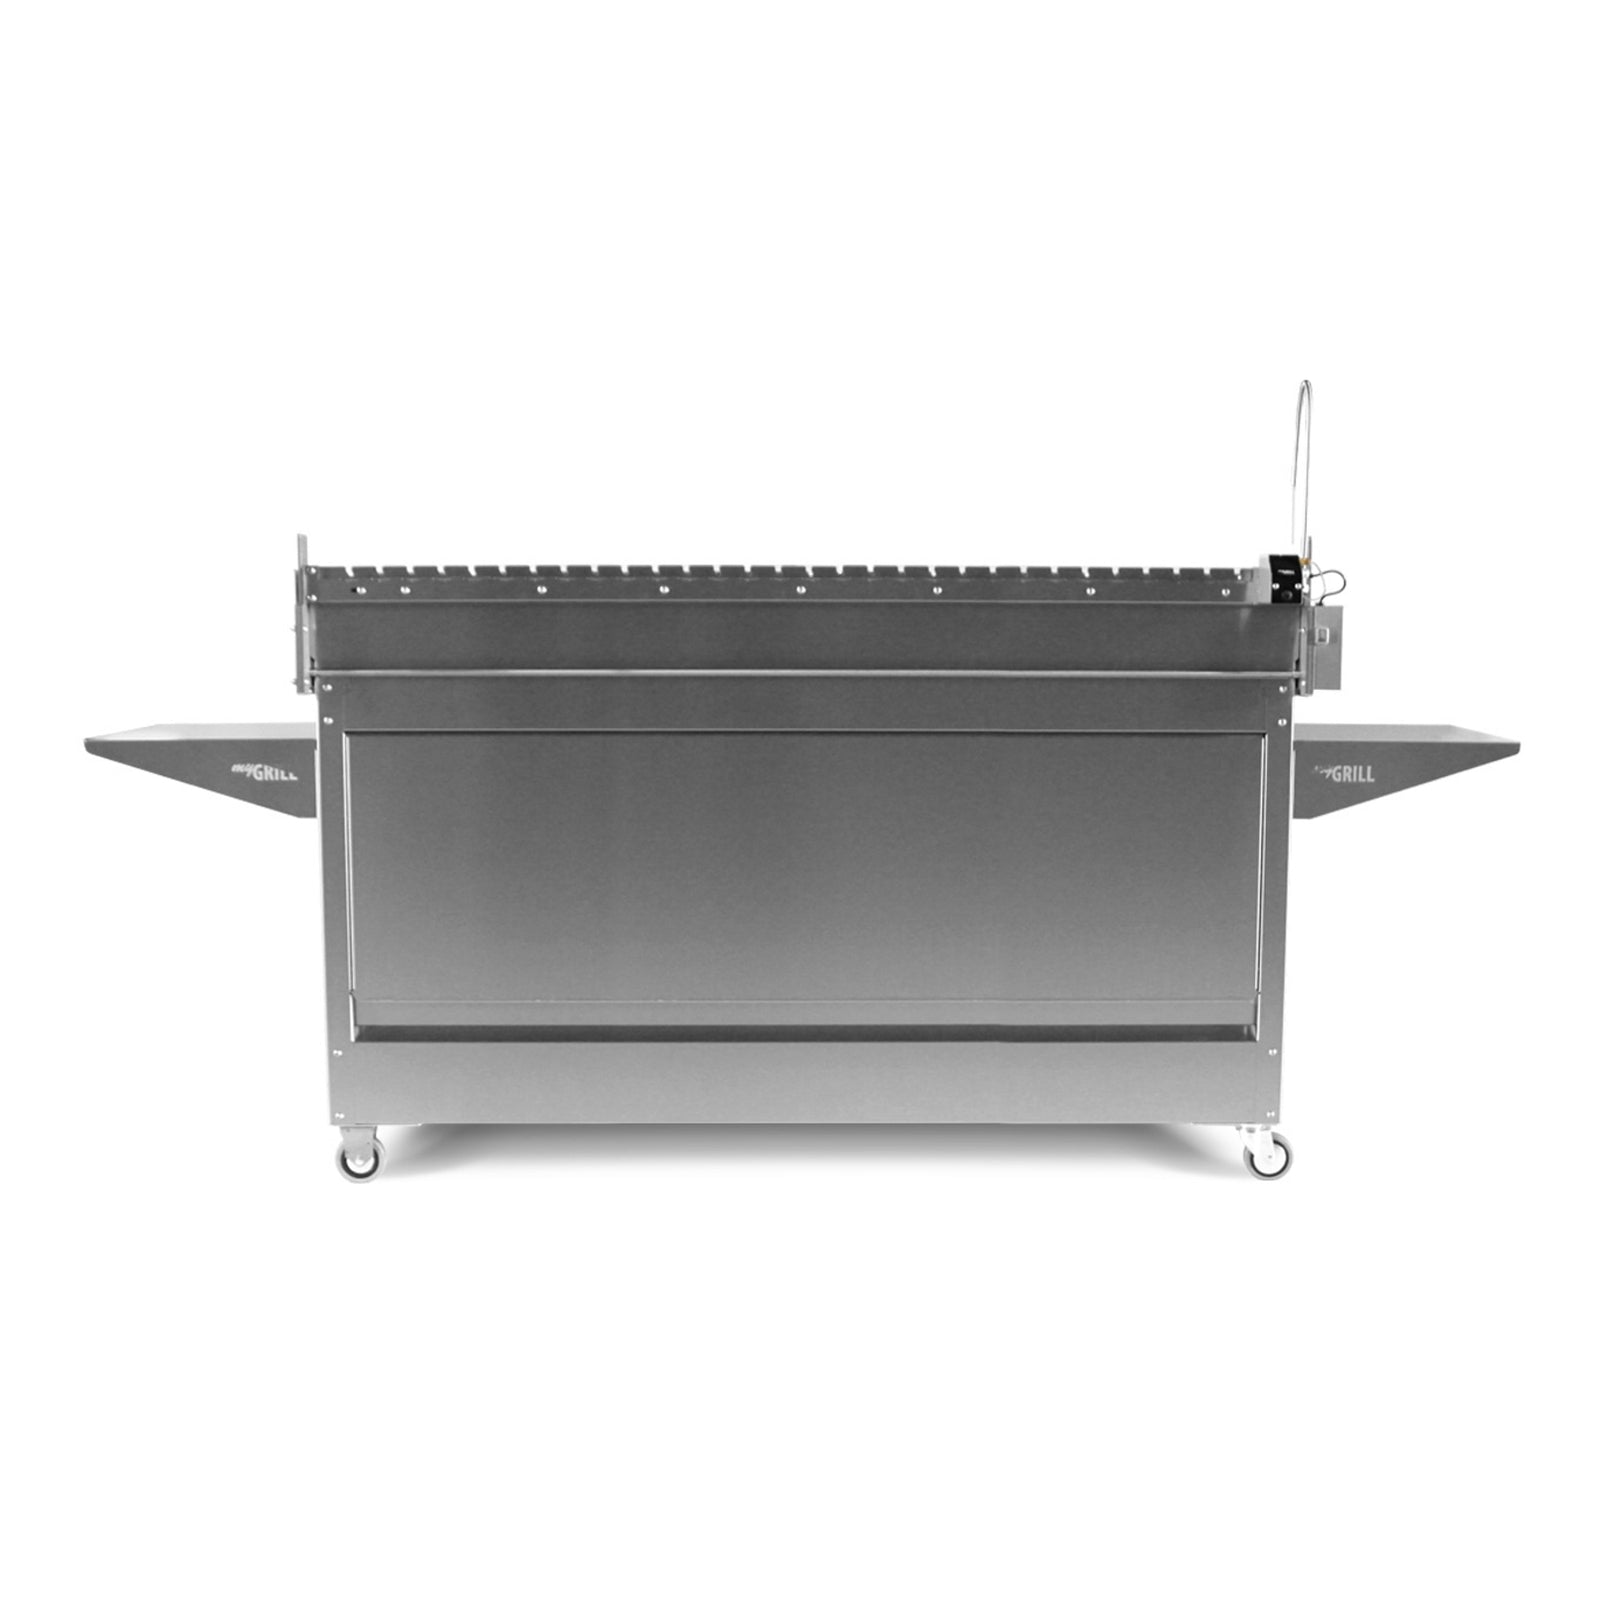 myGRILL Chef SMART Large with Stainless Steel Cart - Ultimate Package - CS3015-15-PLUS